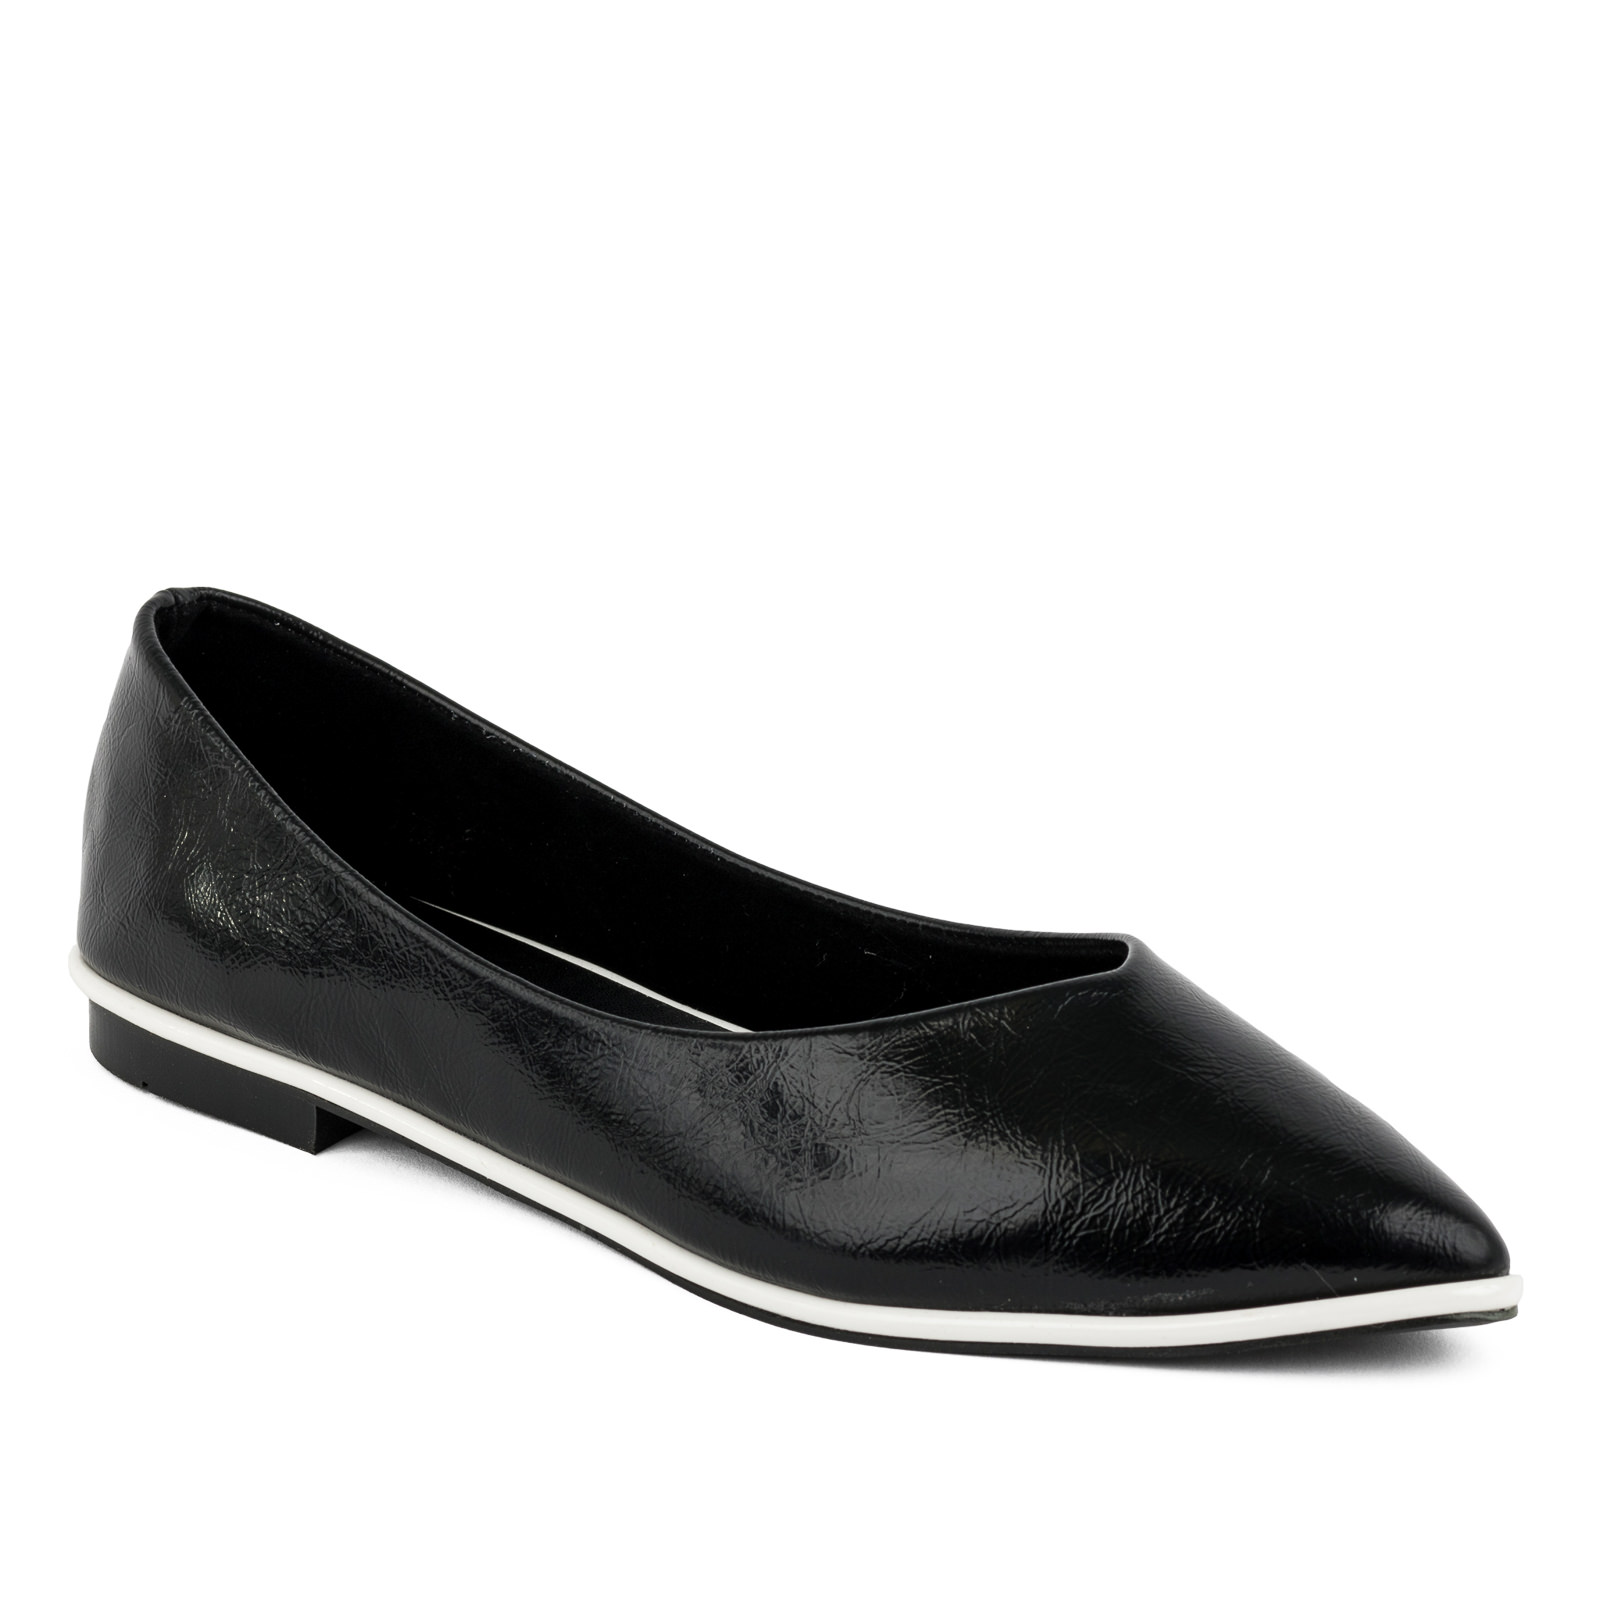 PATENT POINTED FLATS - BLACK